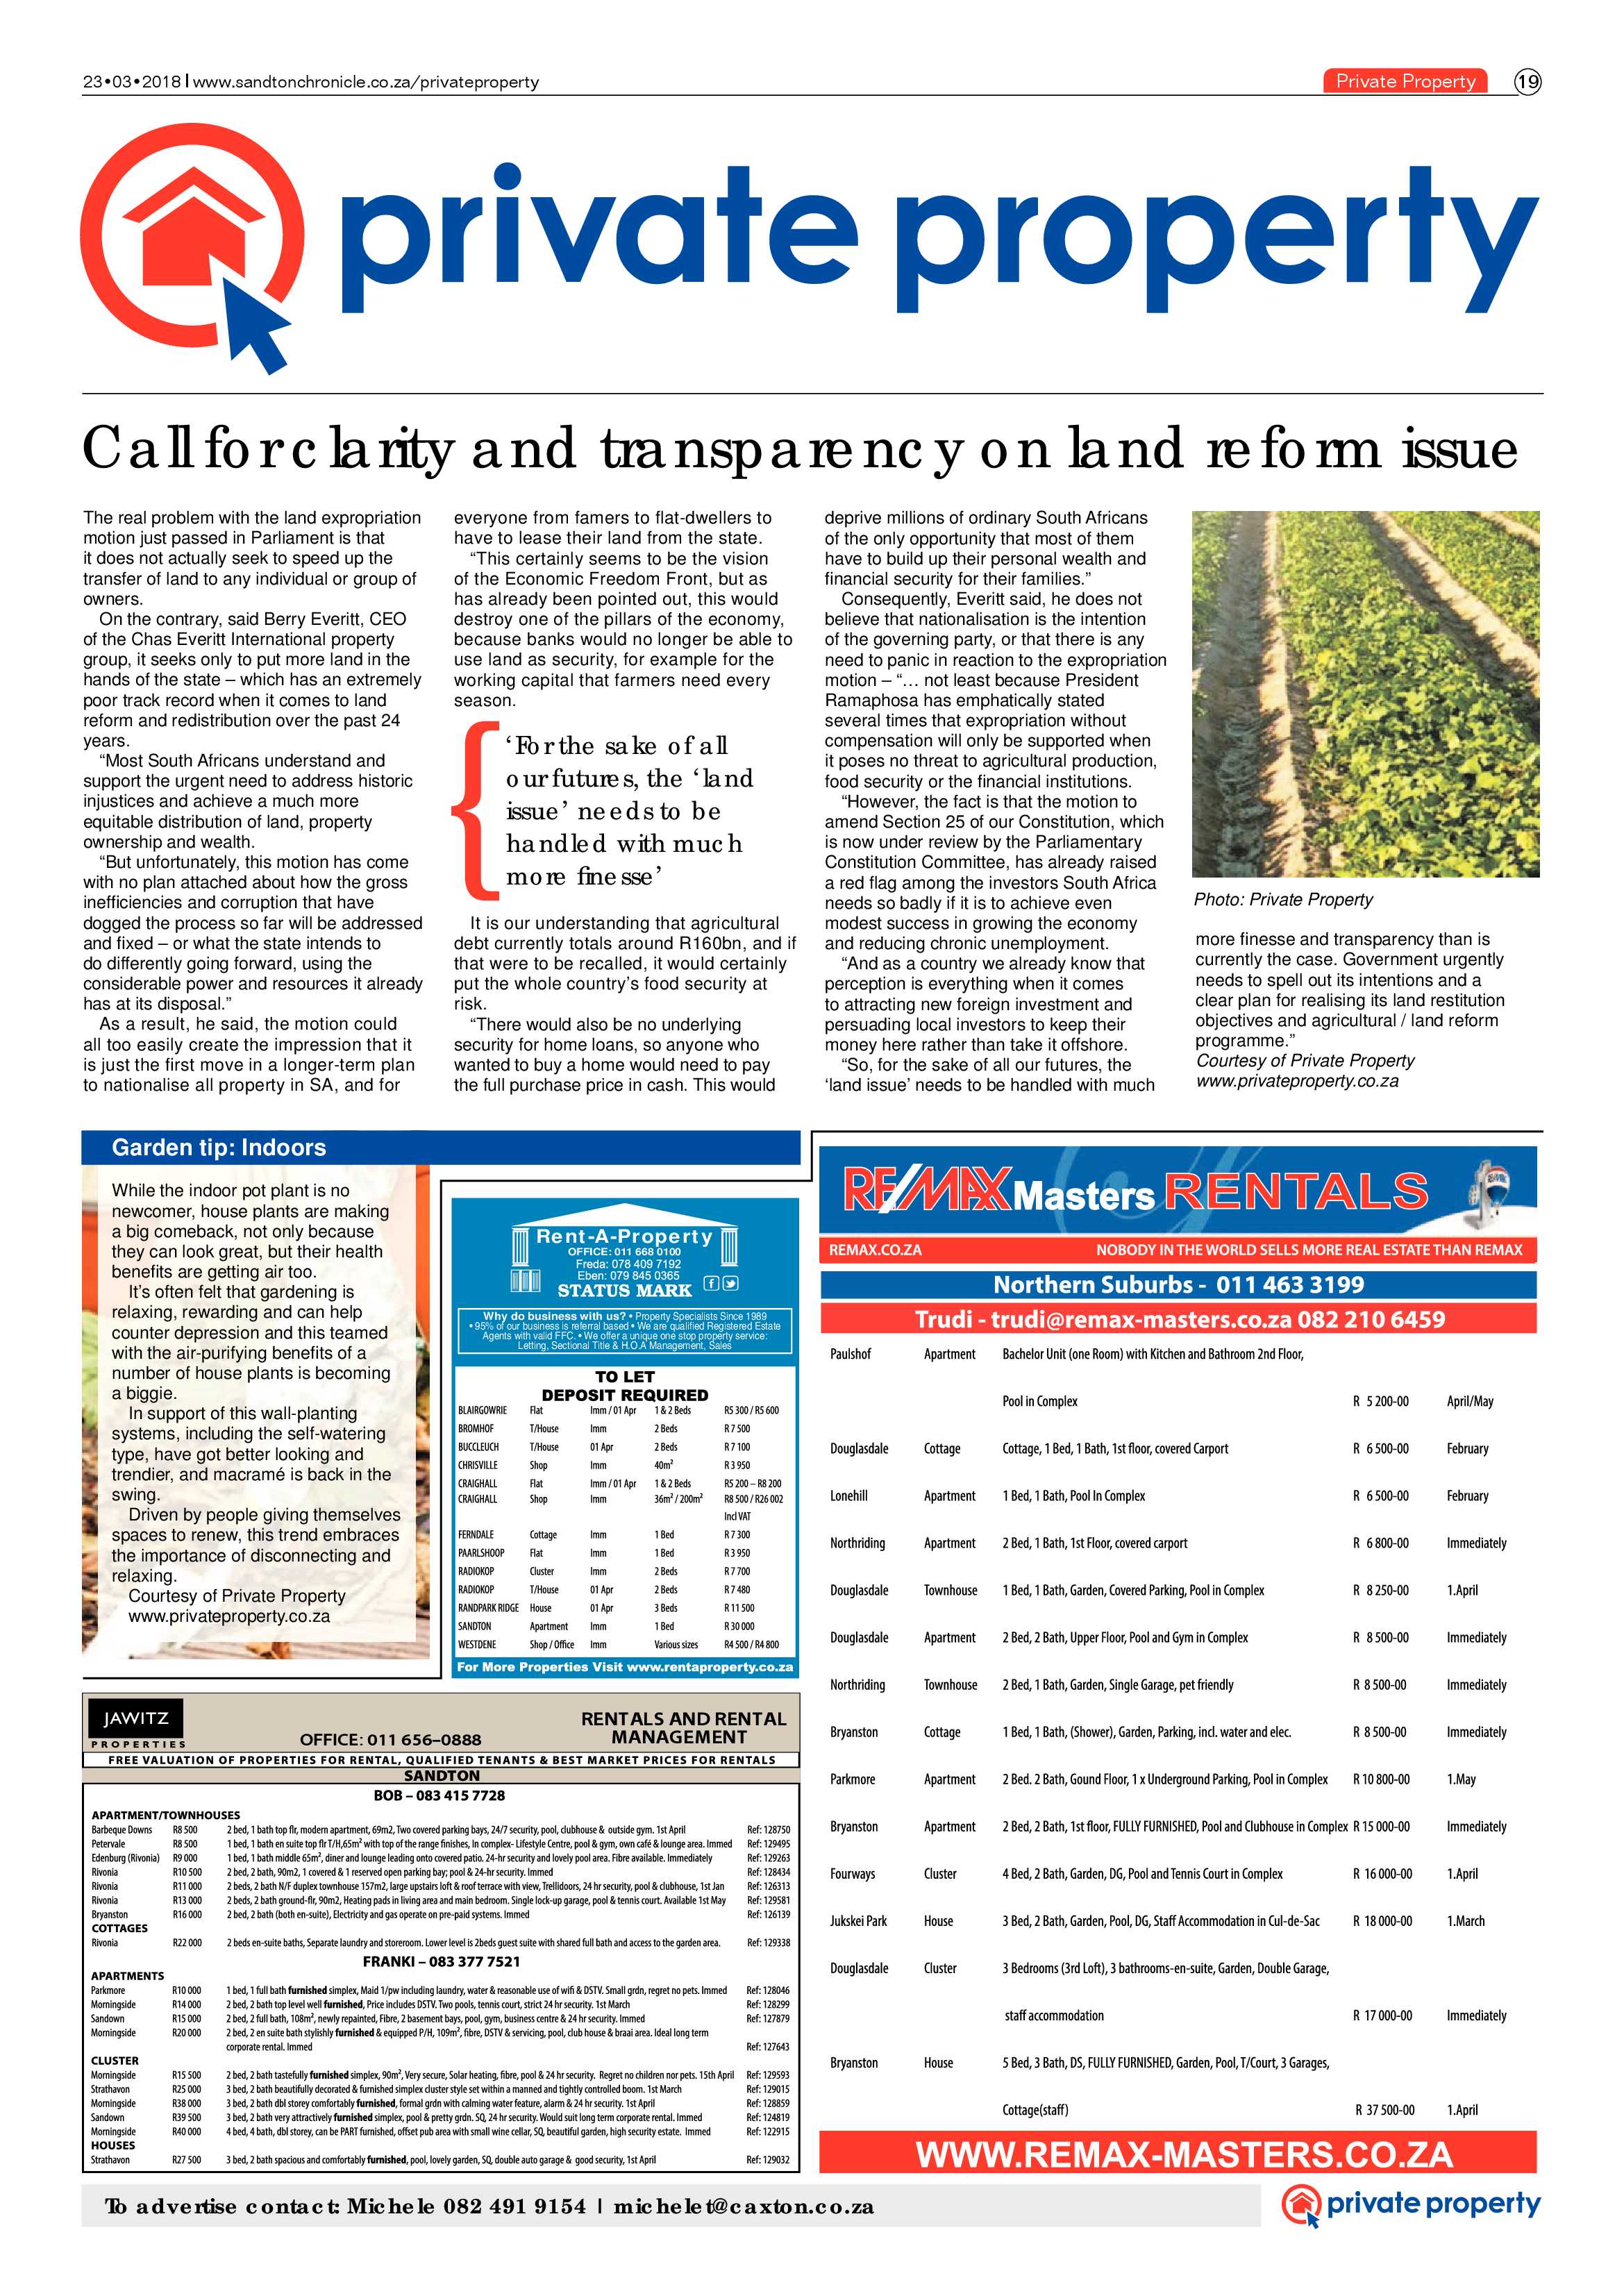 Sandton Chronicle 23 March 2018 page 19